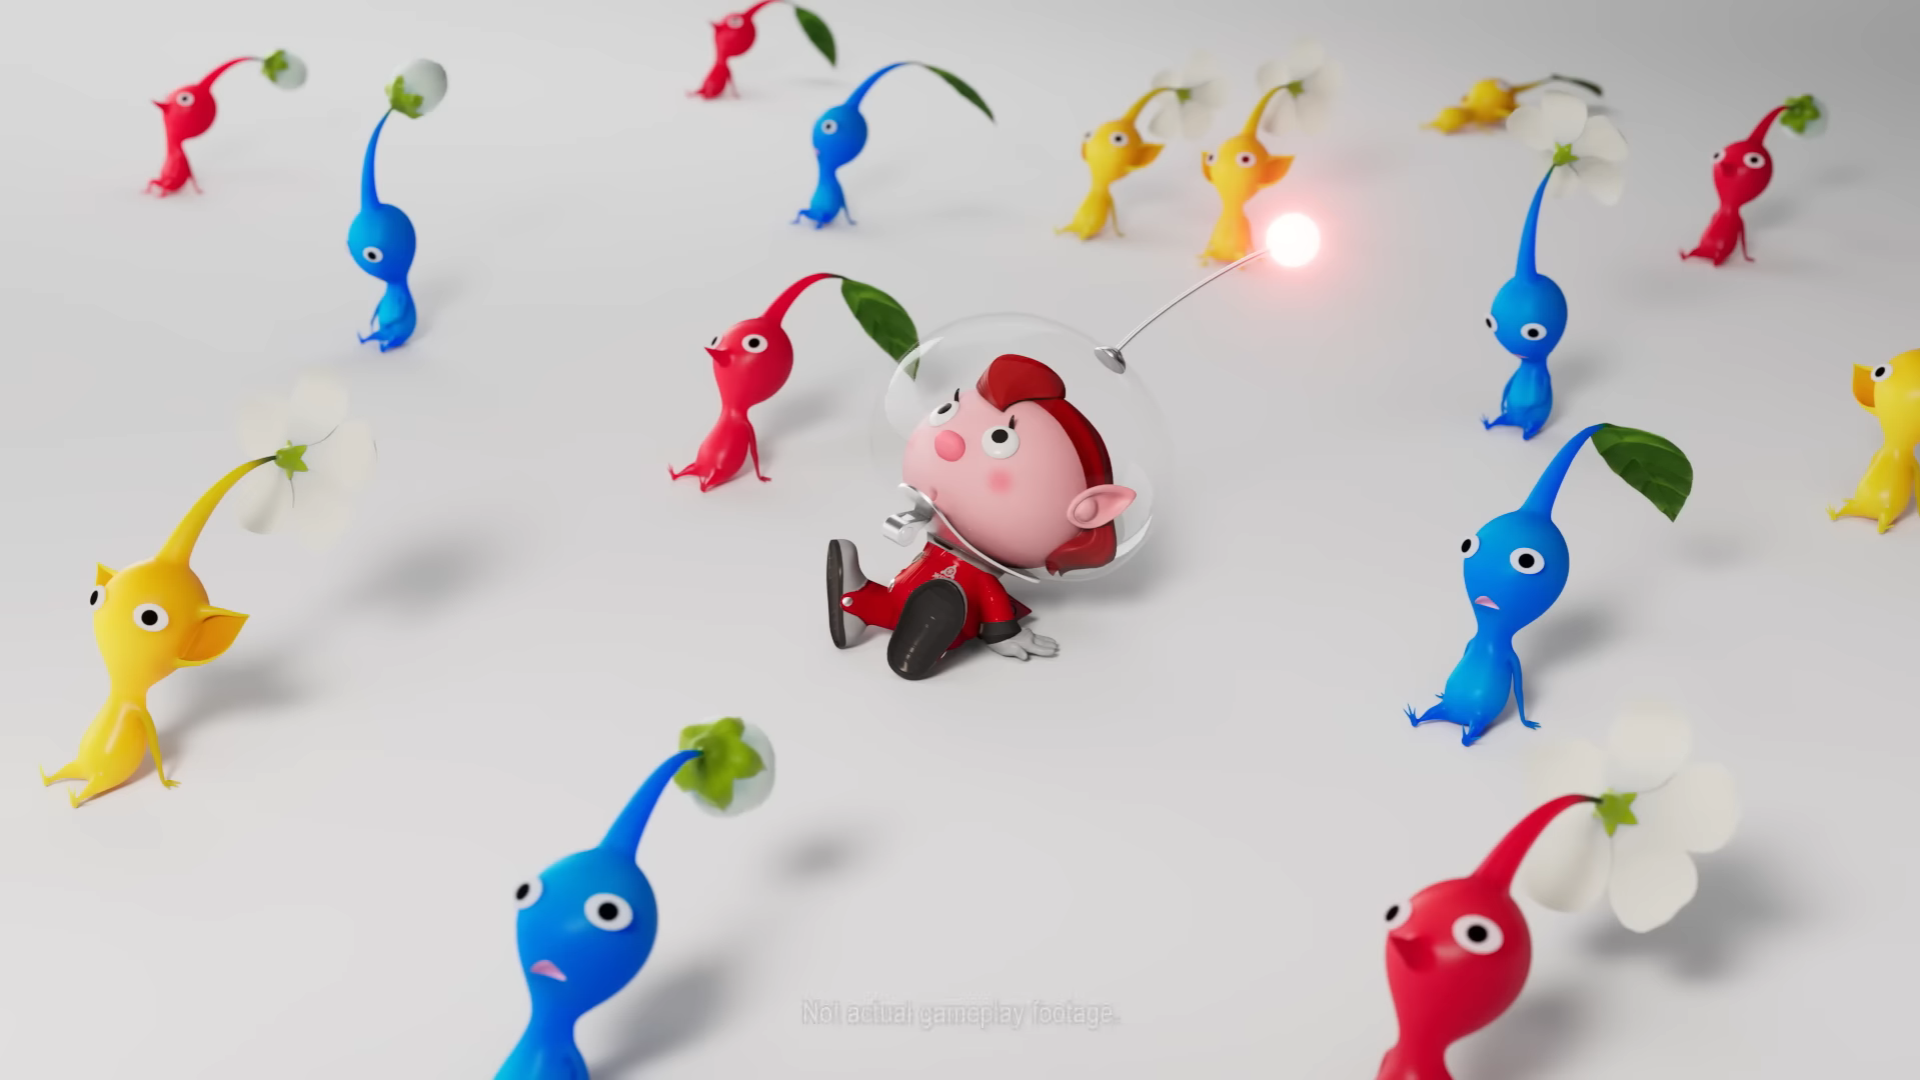 Pikmin 4 Shares New Trailer Introducing Pikmin